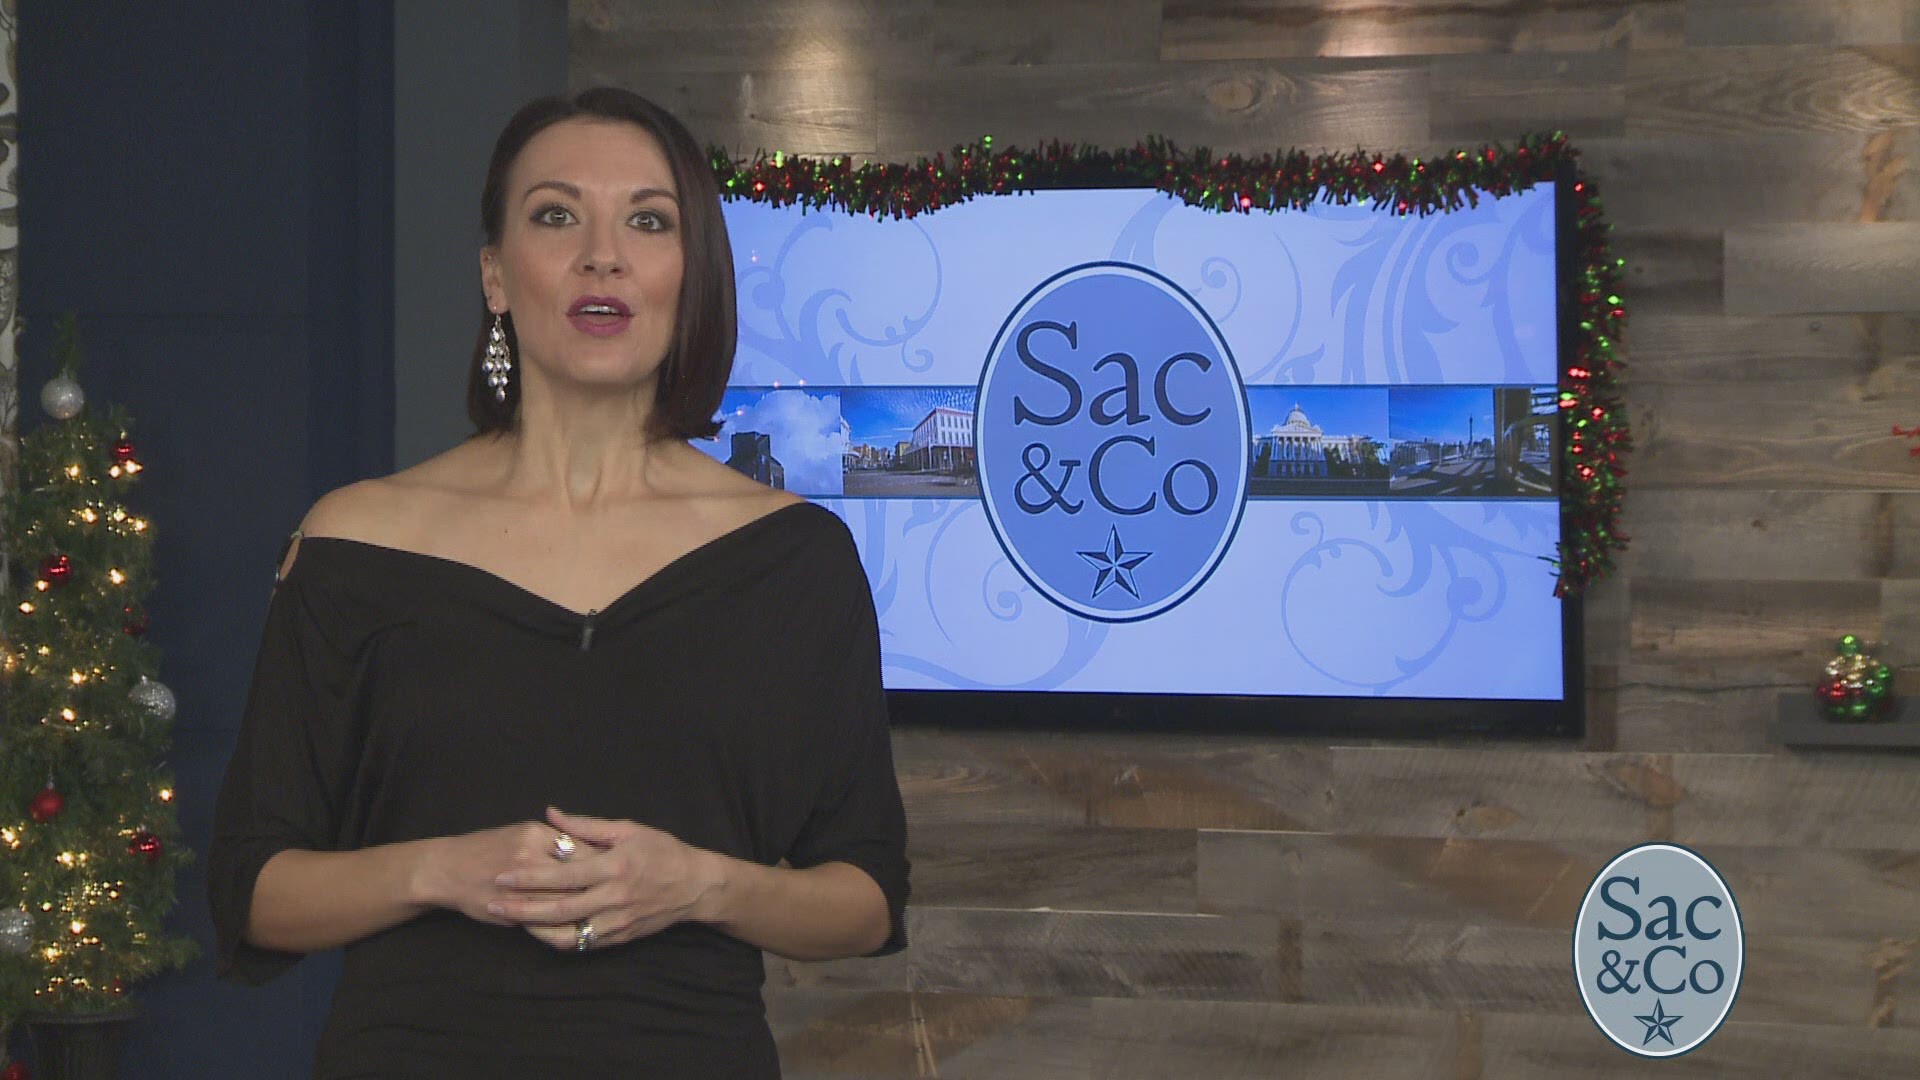 LIFESTYLE EXPERT JOSH MCBRIDE SHOWS US A FEW SUGGESTIONS FOR MAKING THIS THE BEST HOLIDAY YET!